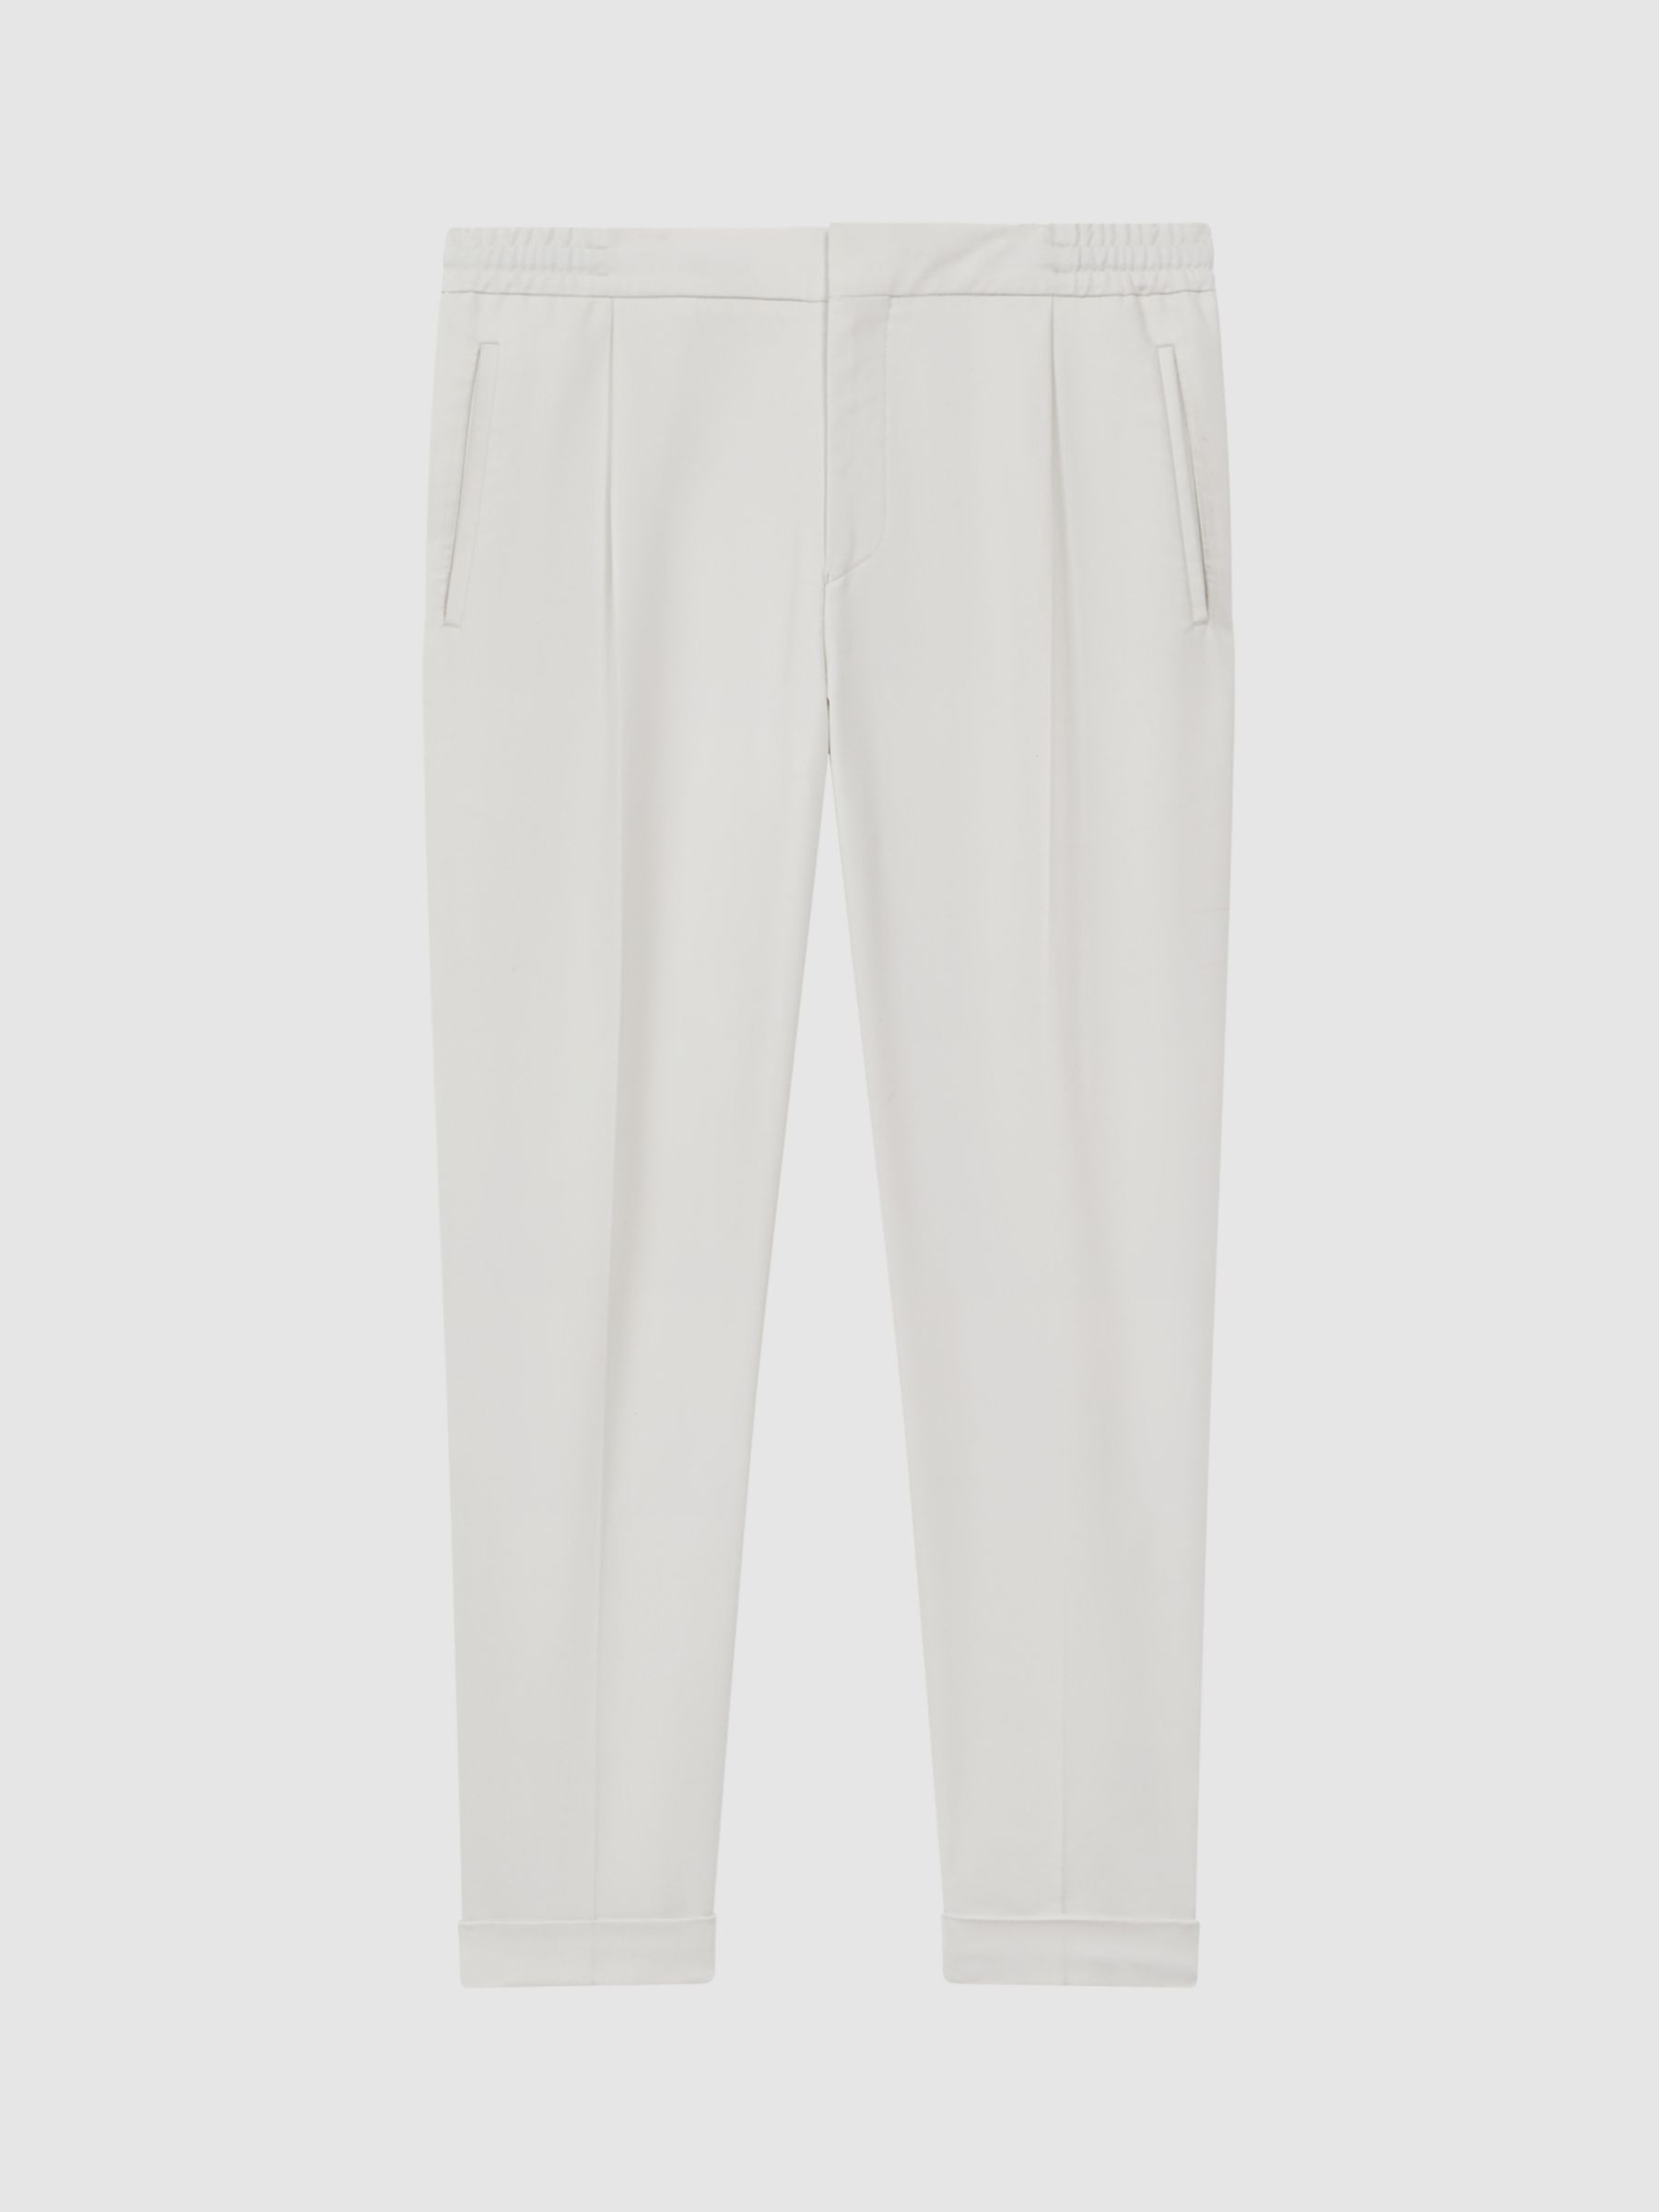 Reiss Brighton Pleated Relaxed Trousers, Ecru at John Lewis & Partners